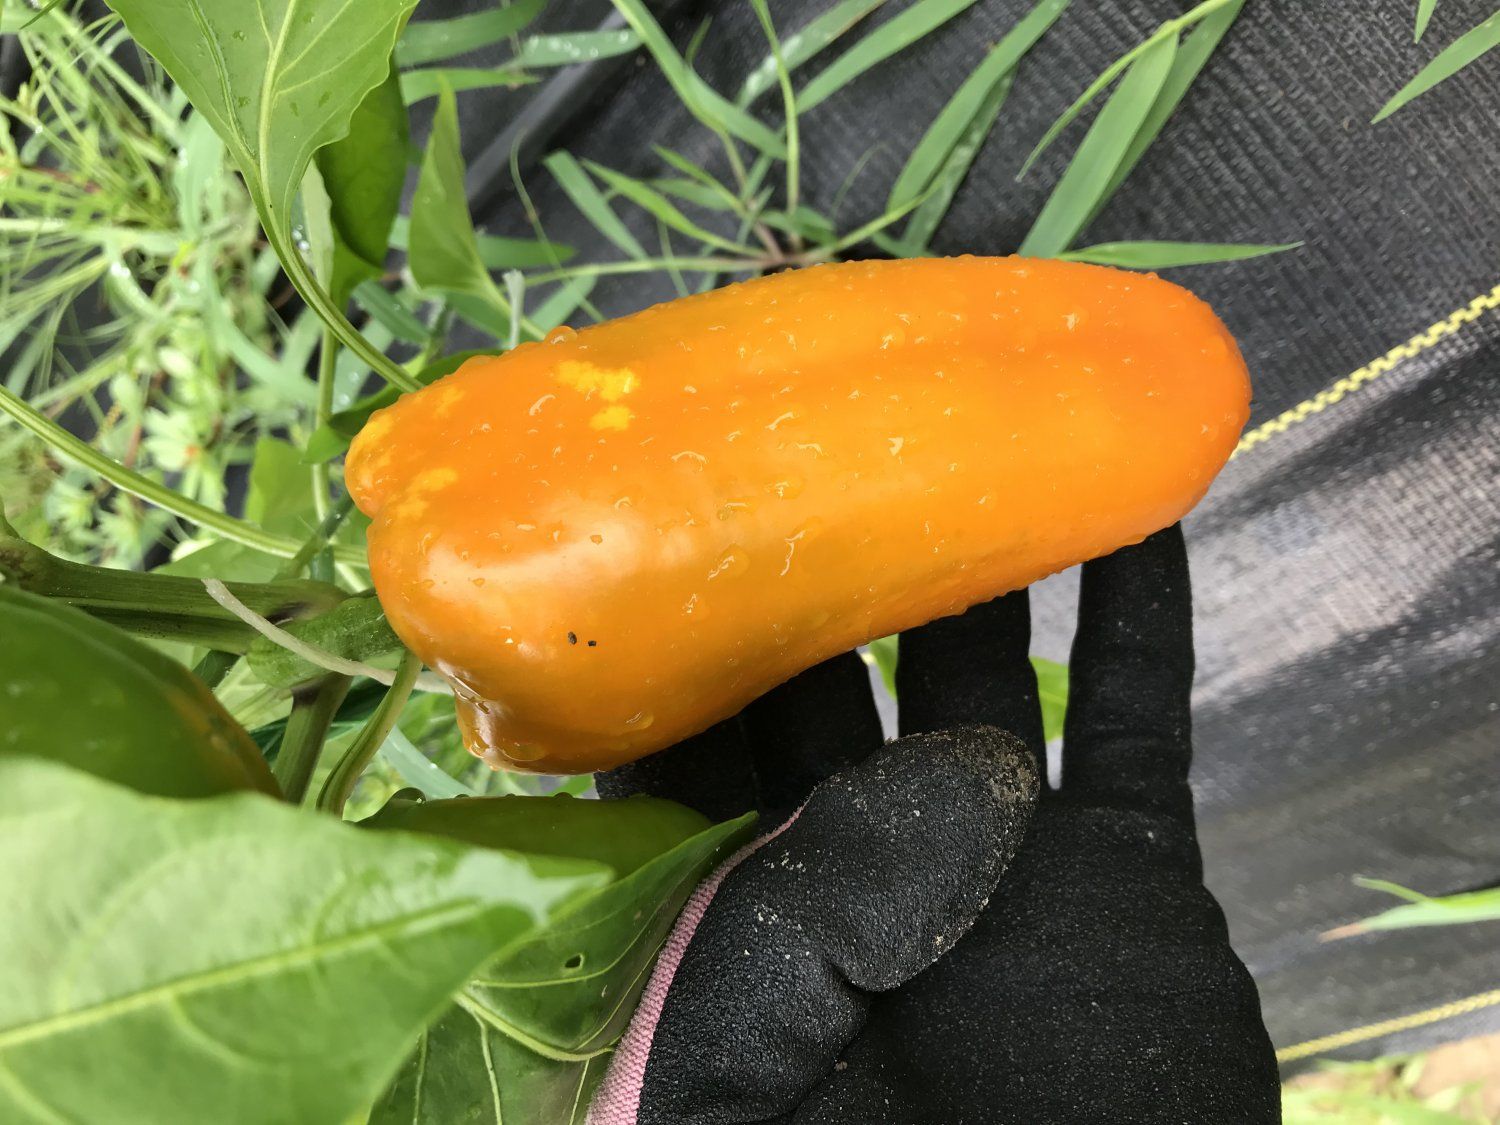 Week #9 is all about peppers!